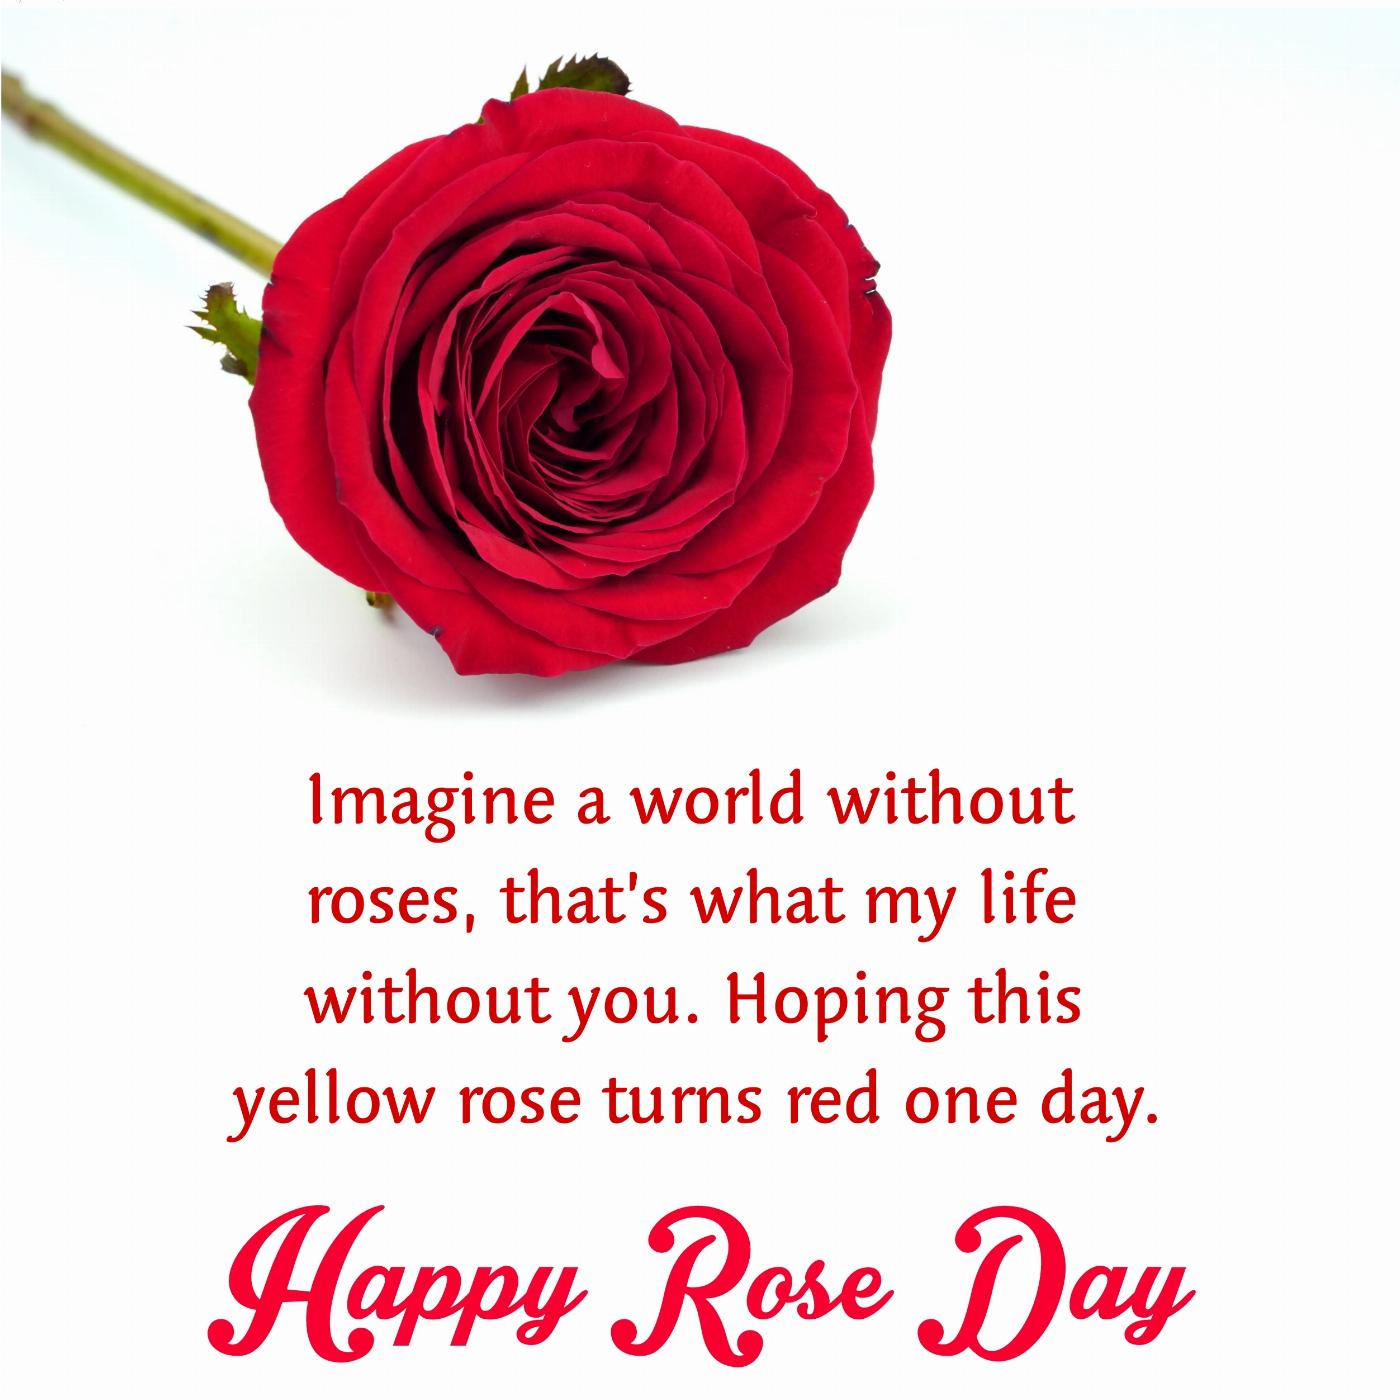 Imagine a world without roses